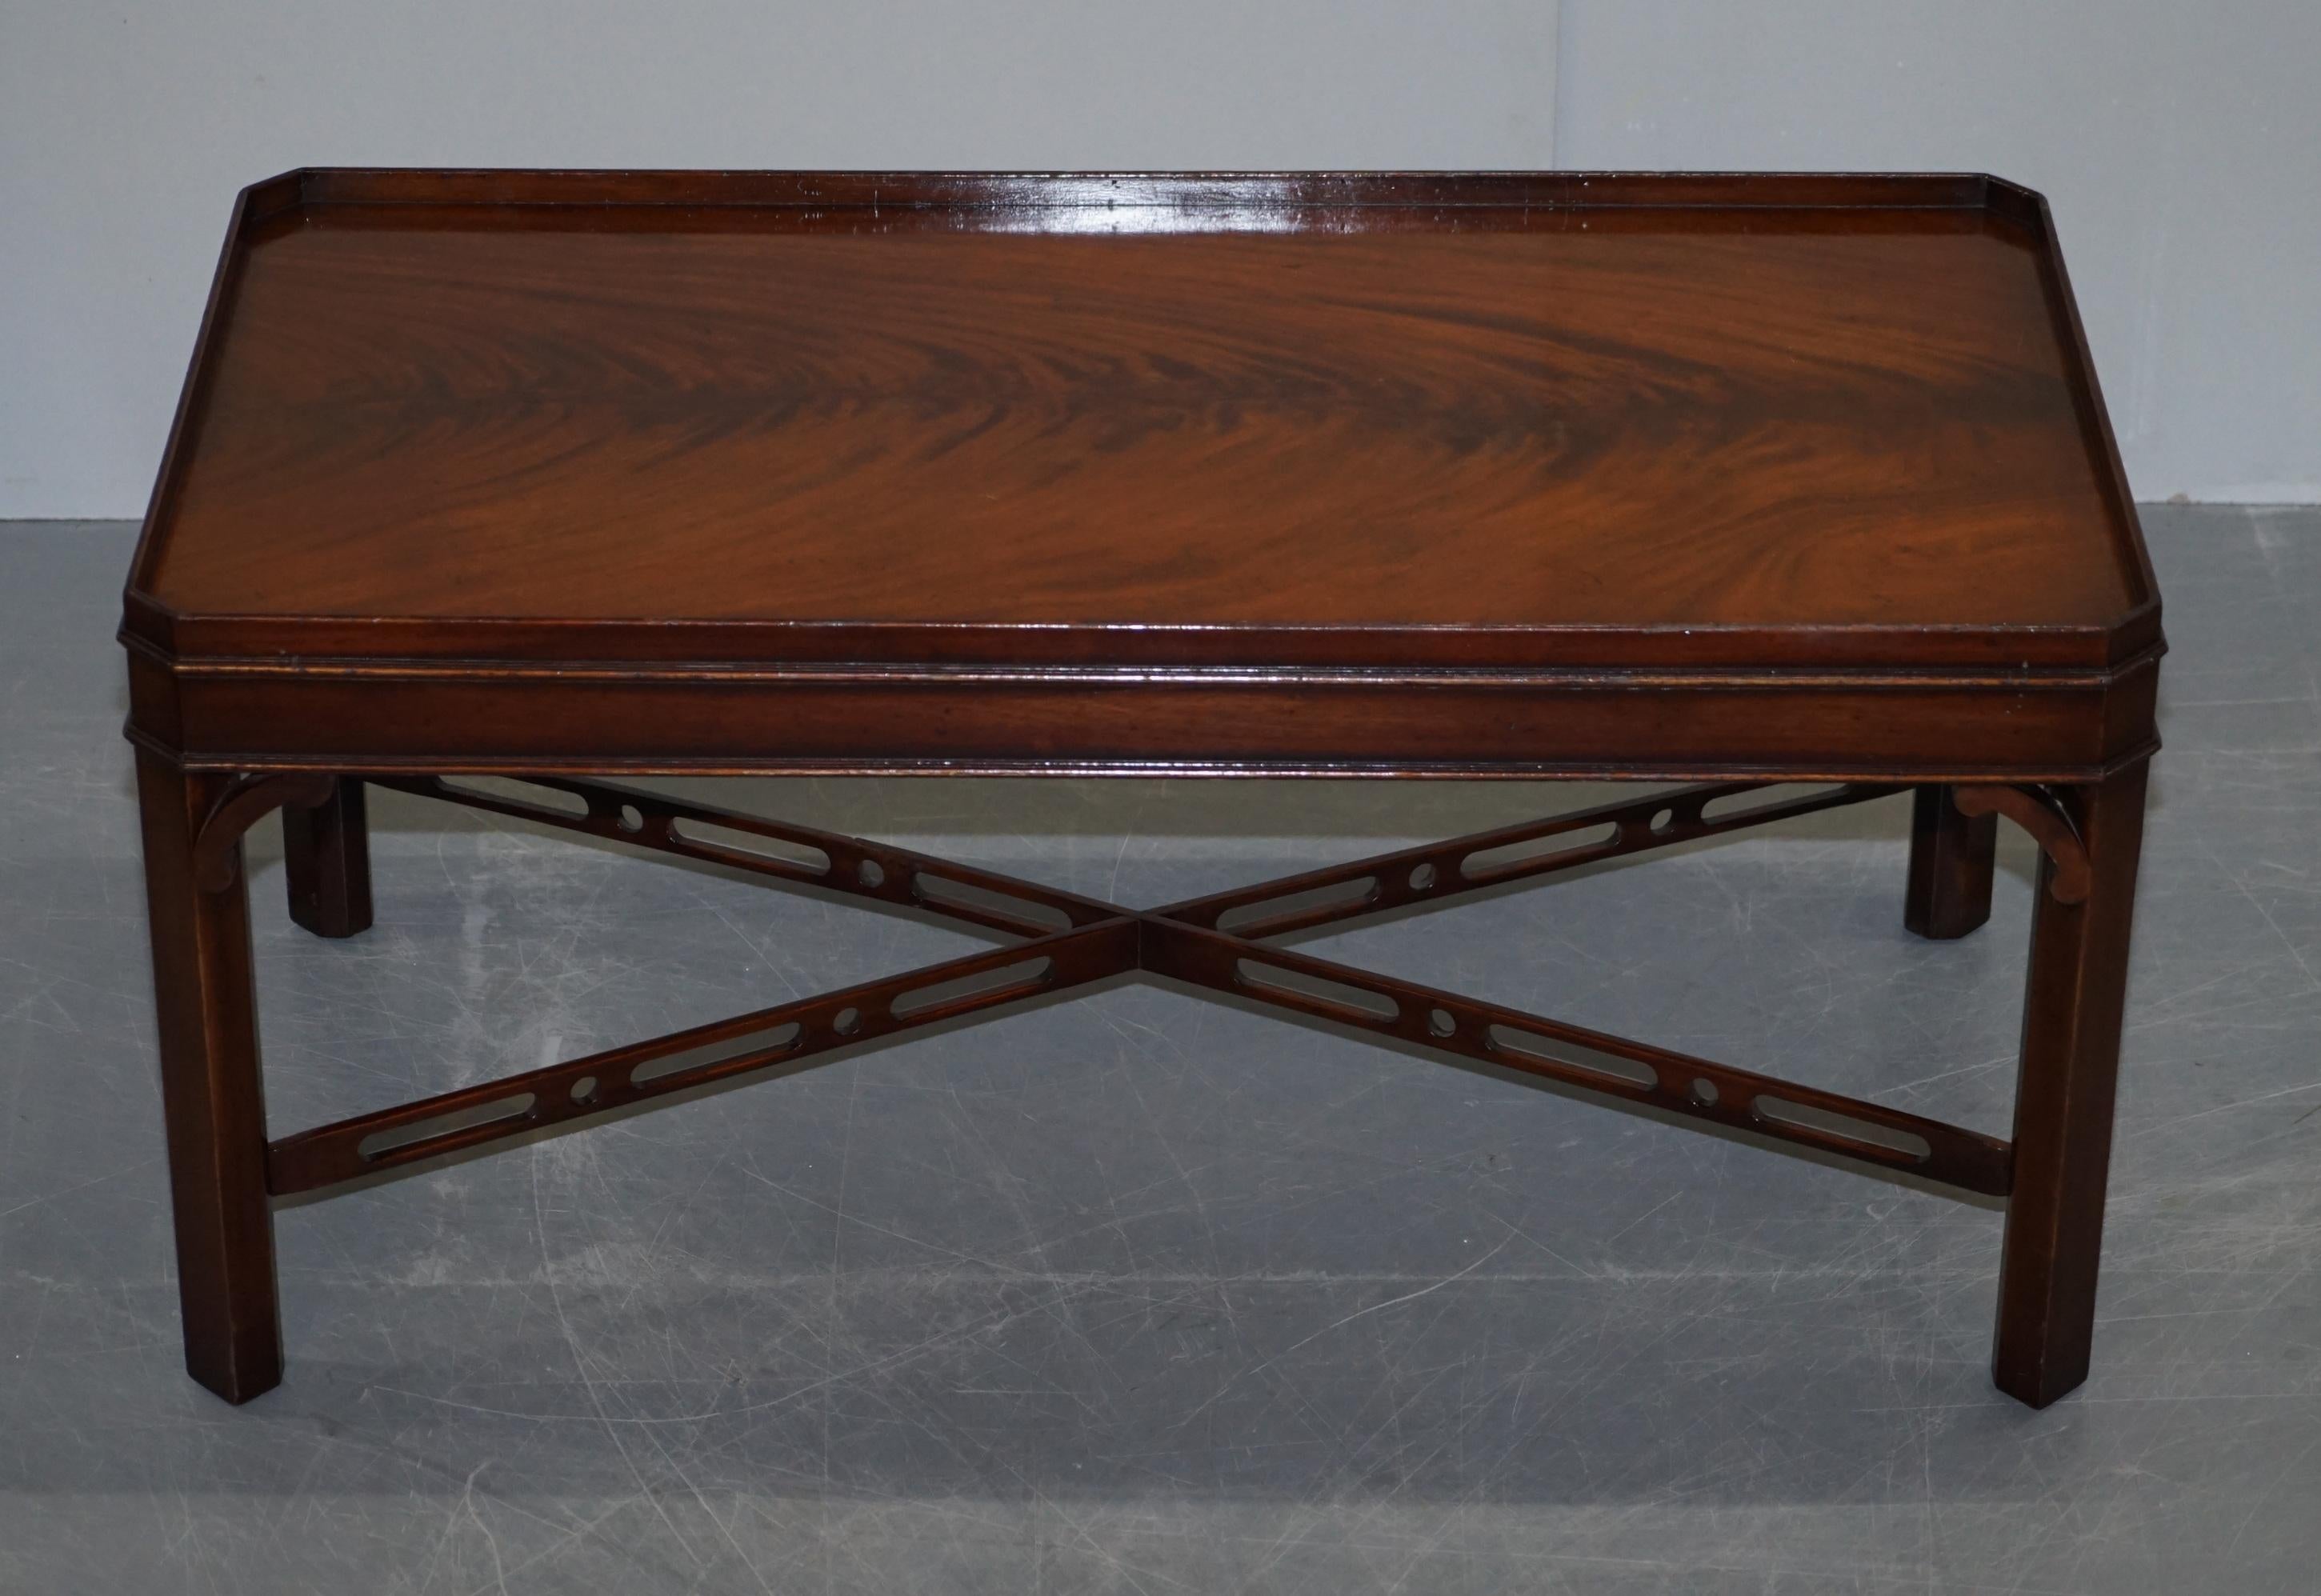 We are delighted to offer this lovely Flamed Mahogany coffee table with gallery rail and fret work carved stretchers in the Thomas Chippendale manor 

A very good looking decorative and well made piece. The timber patina is to die for, it is such